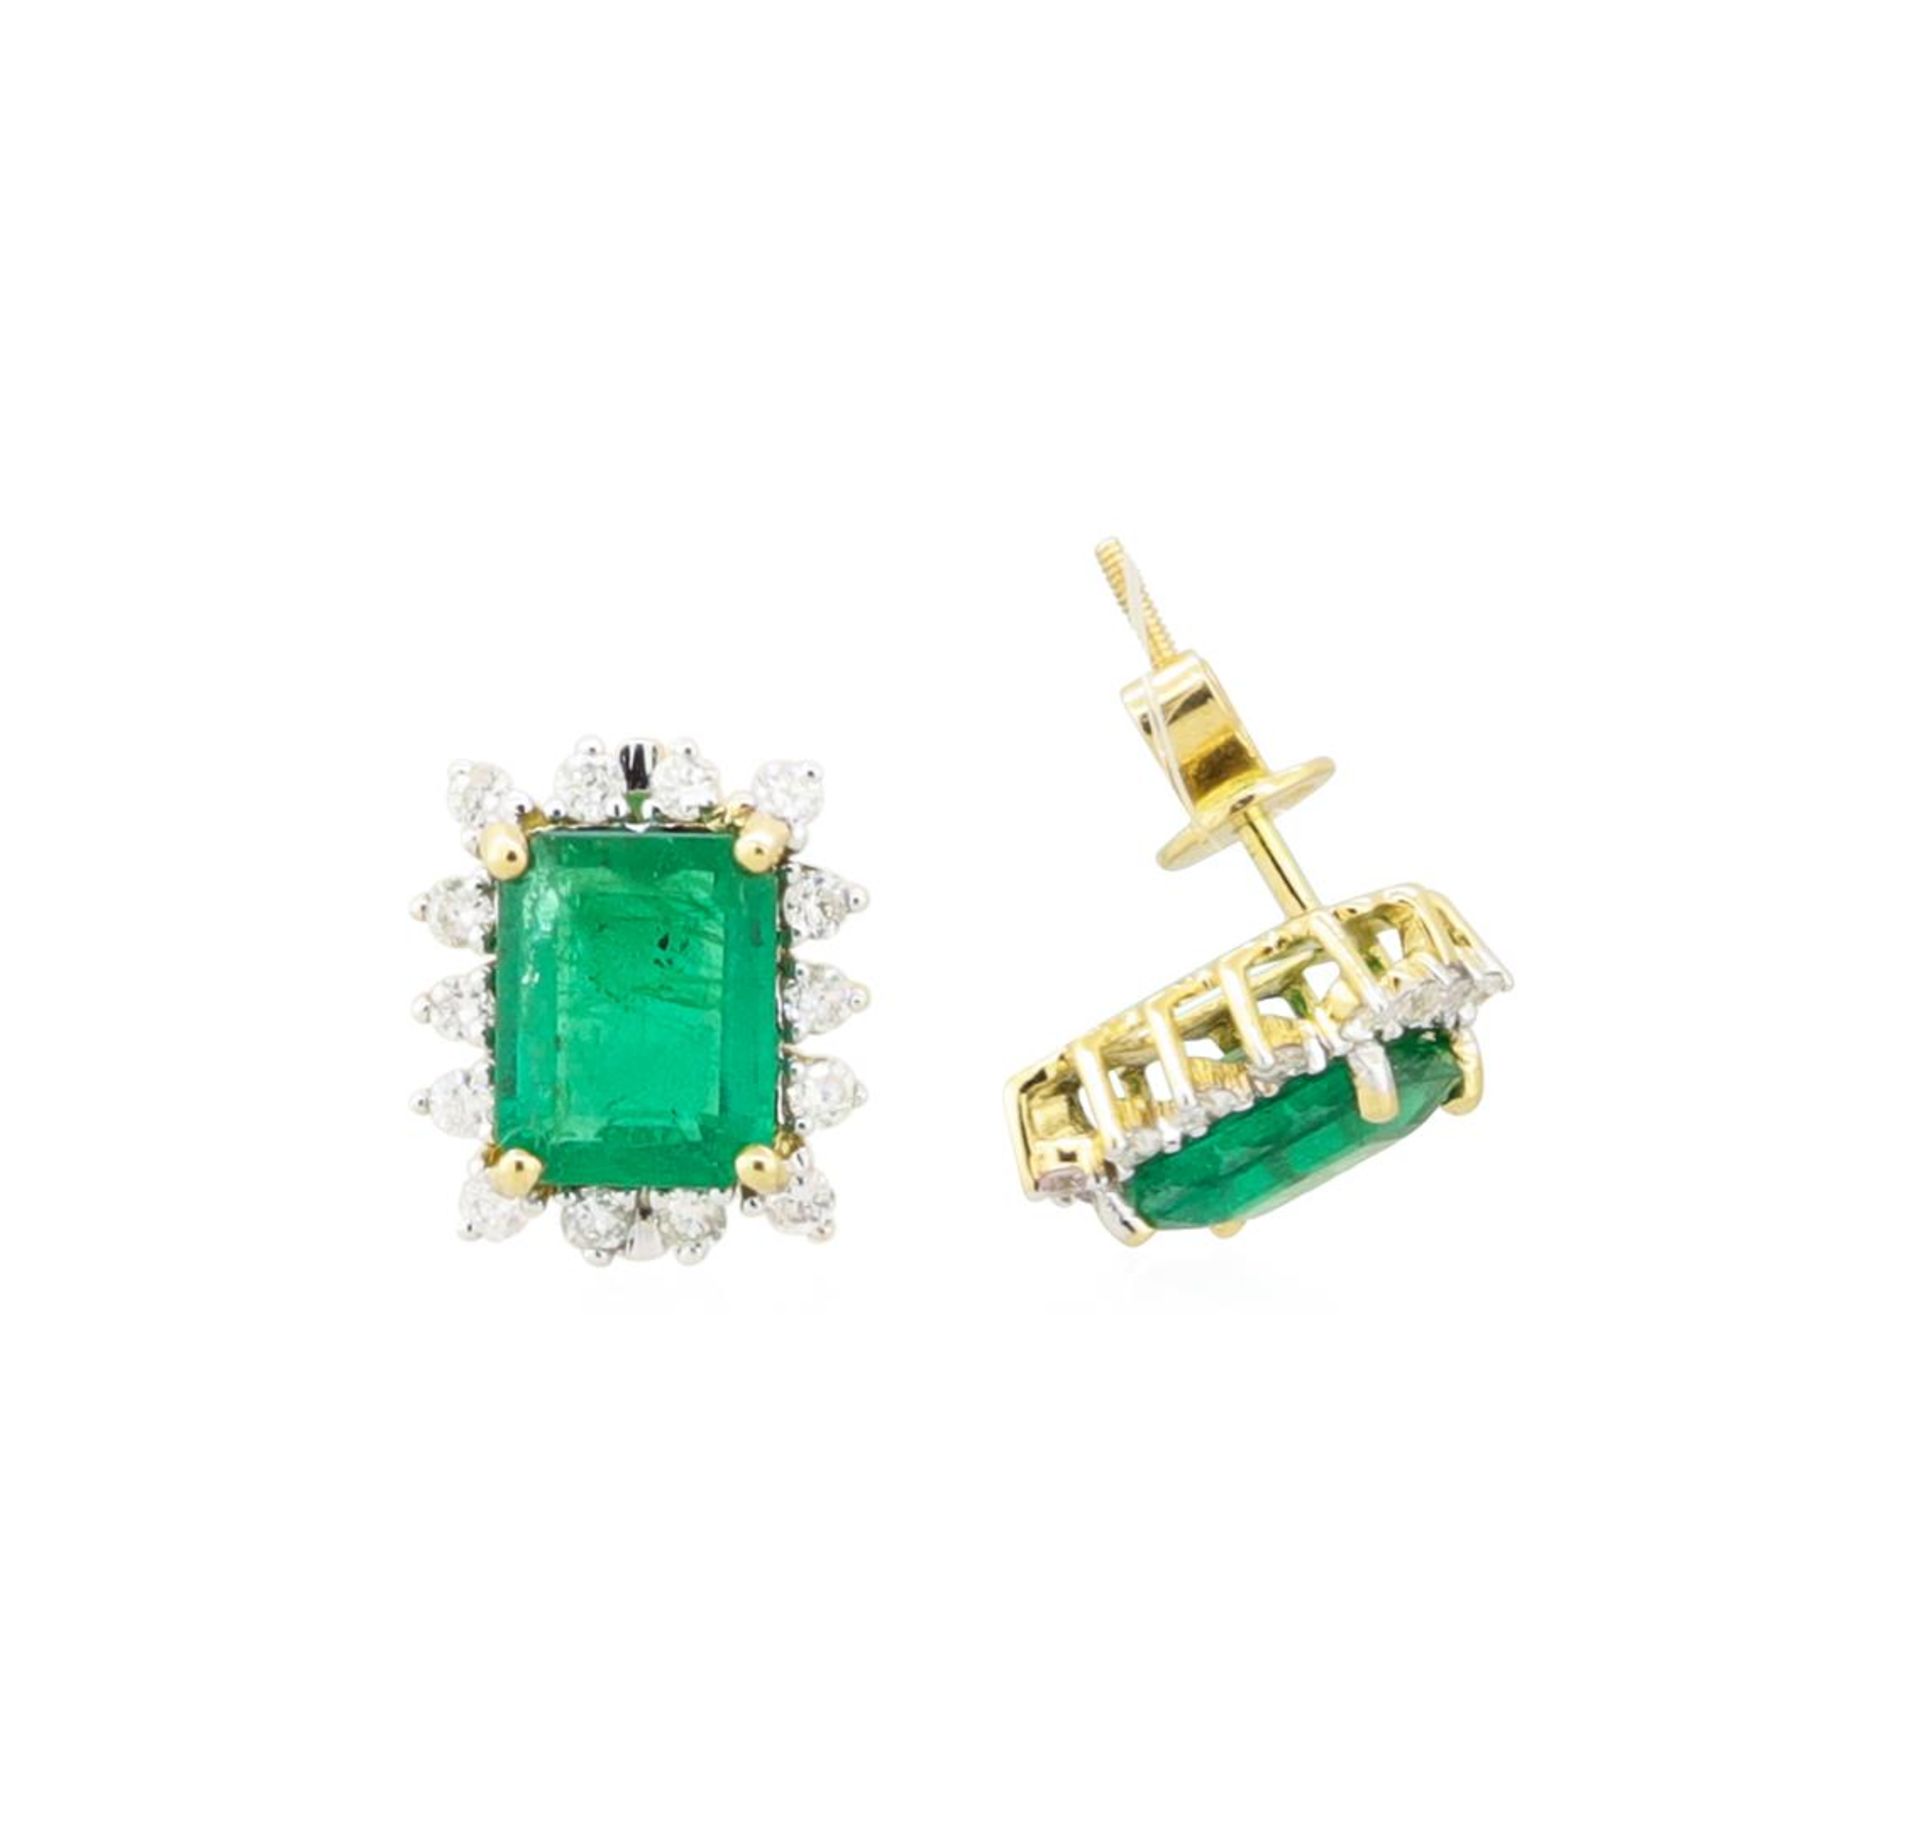 4.18ctw Emerald and Diamond Earrings - 18KT Yellow Gold - Image 2 of 2